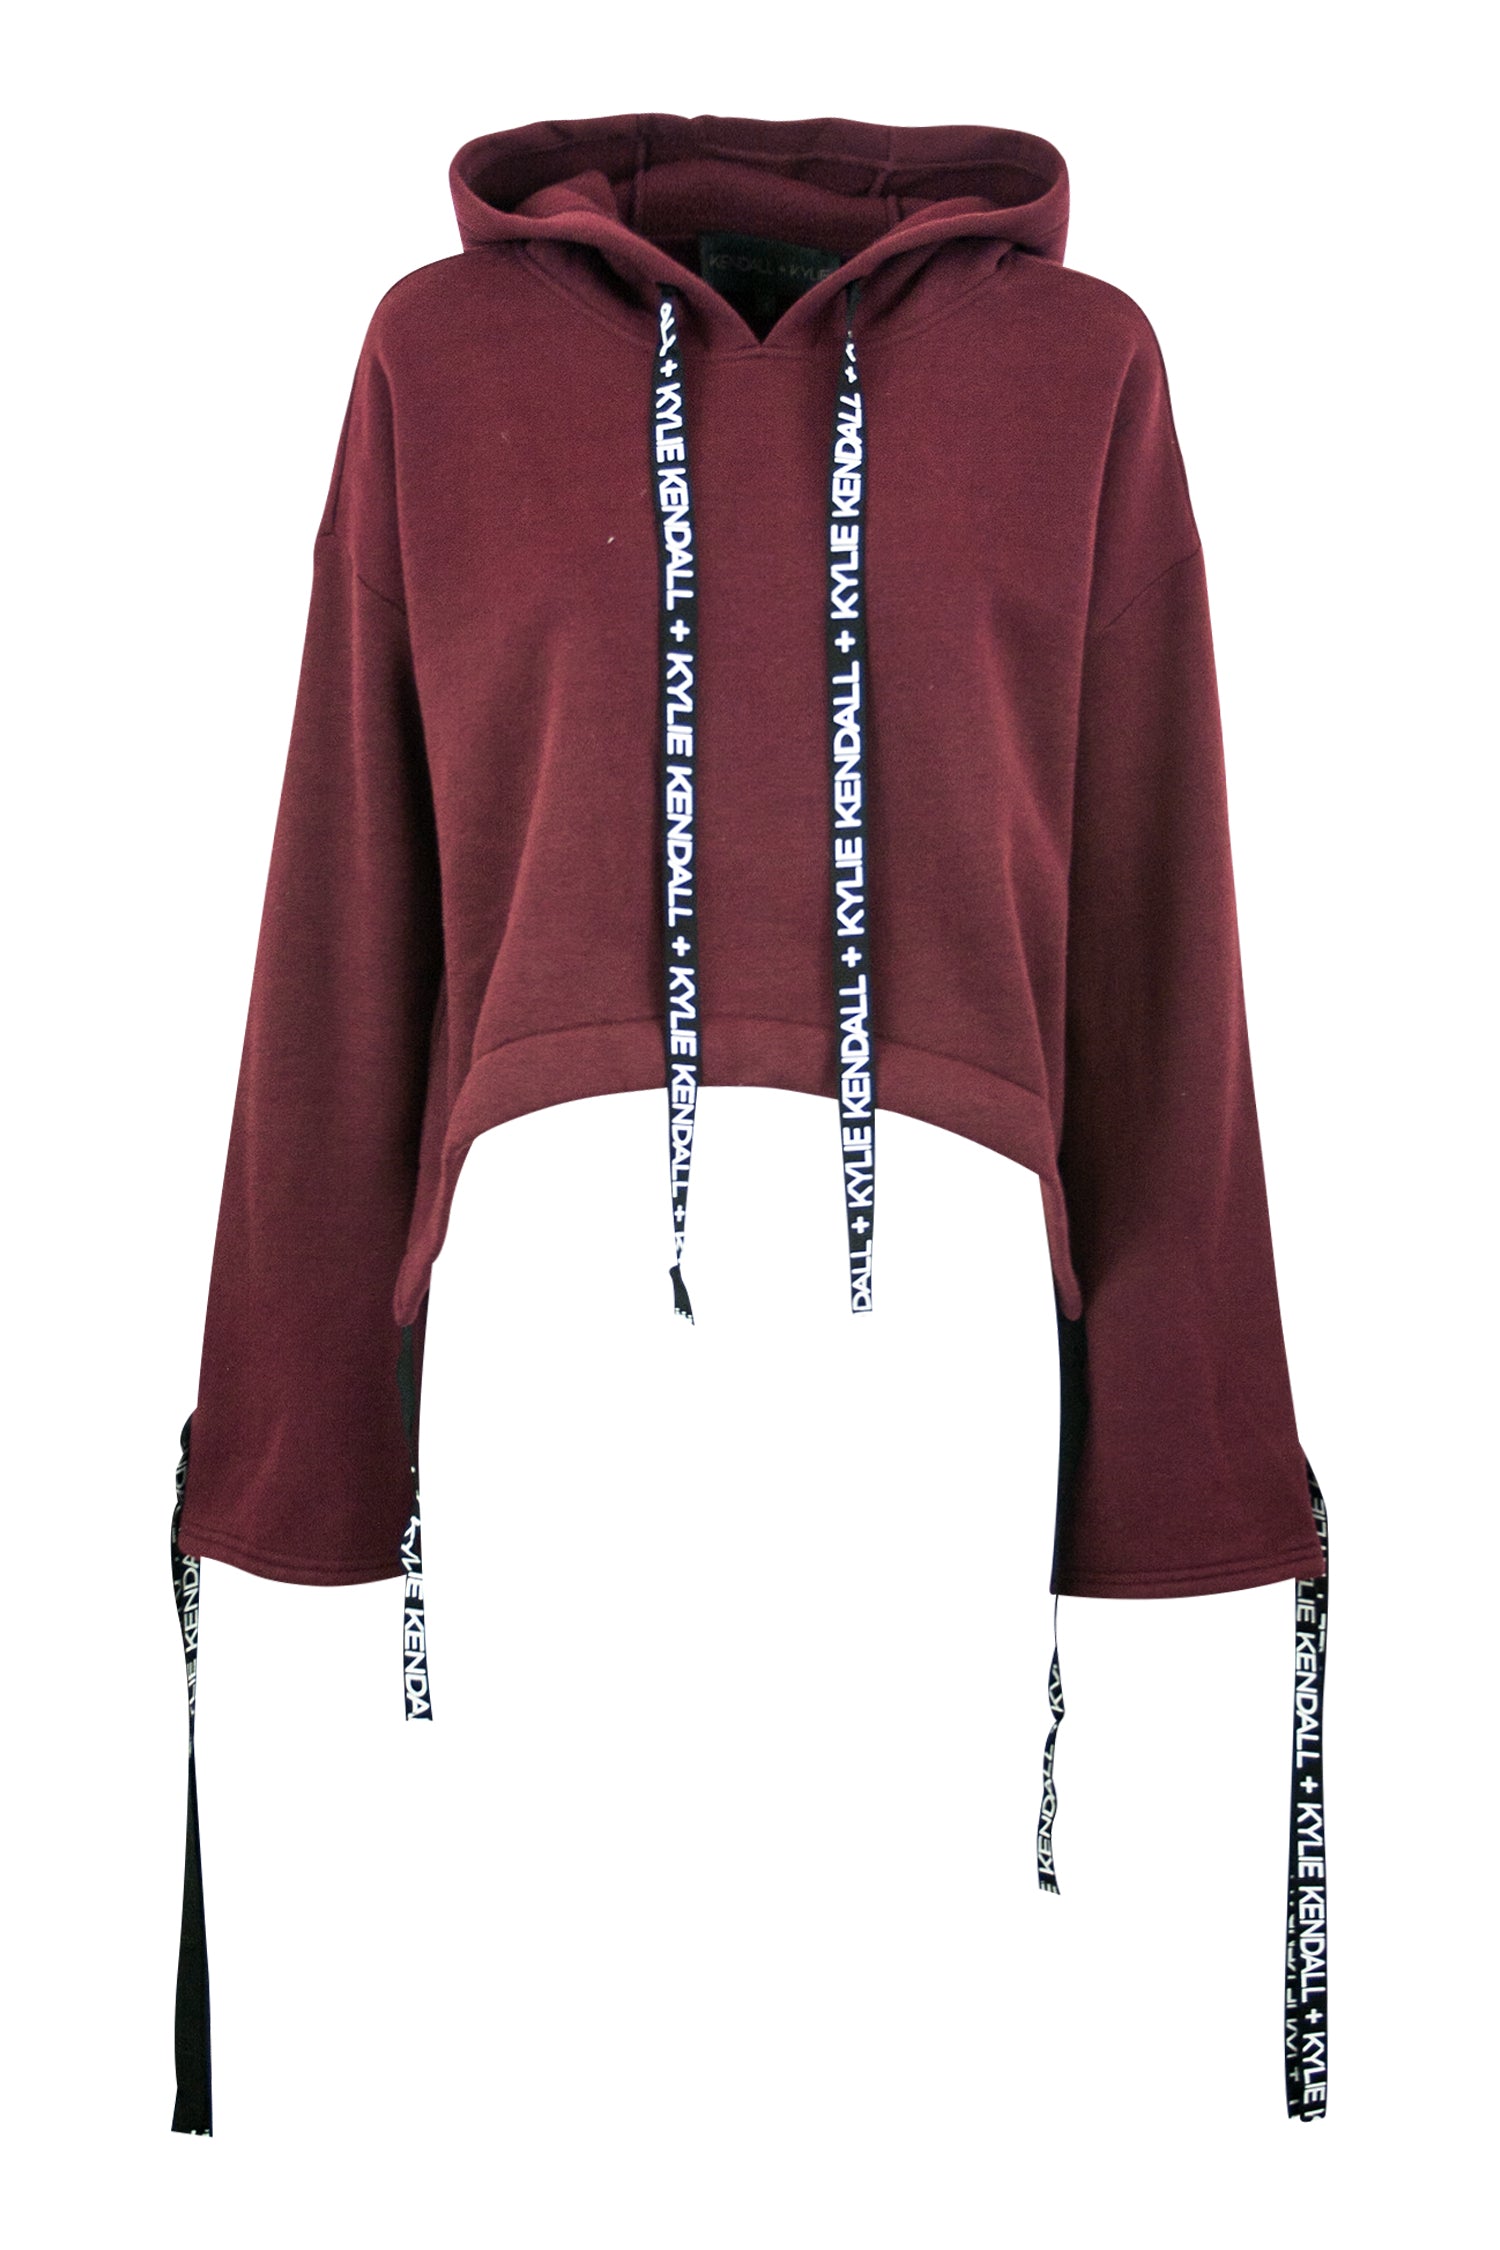 KENDALL AND KYLIE
Crop sweatshirt with Kendall + Kylie logo tapes